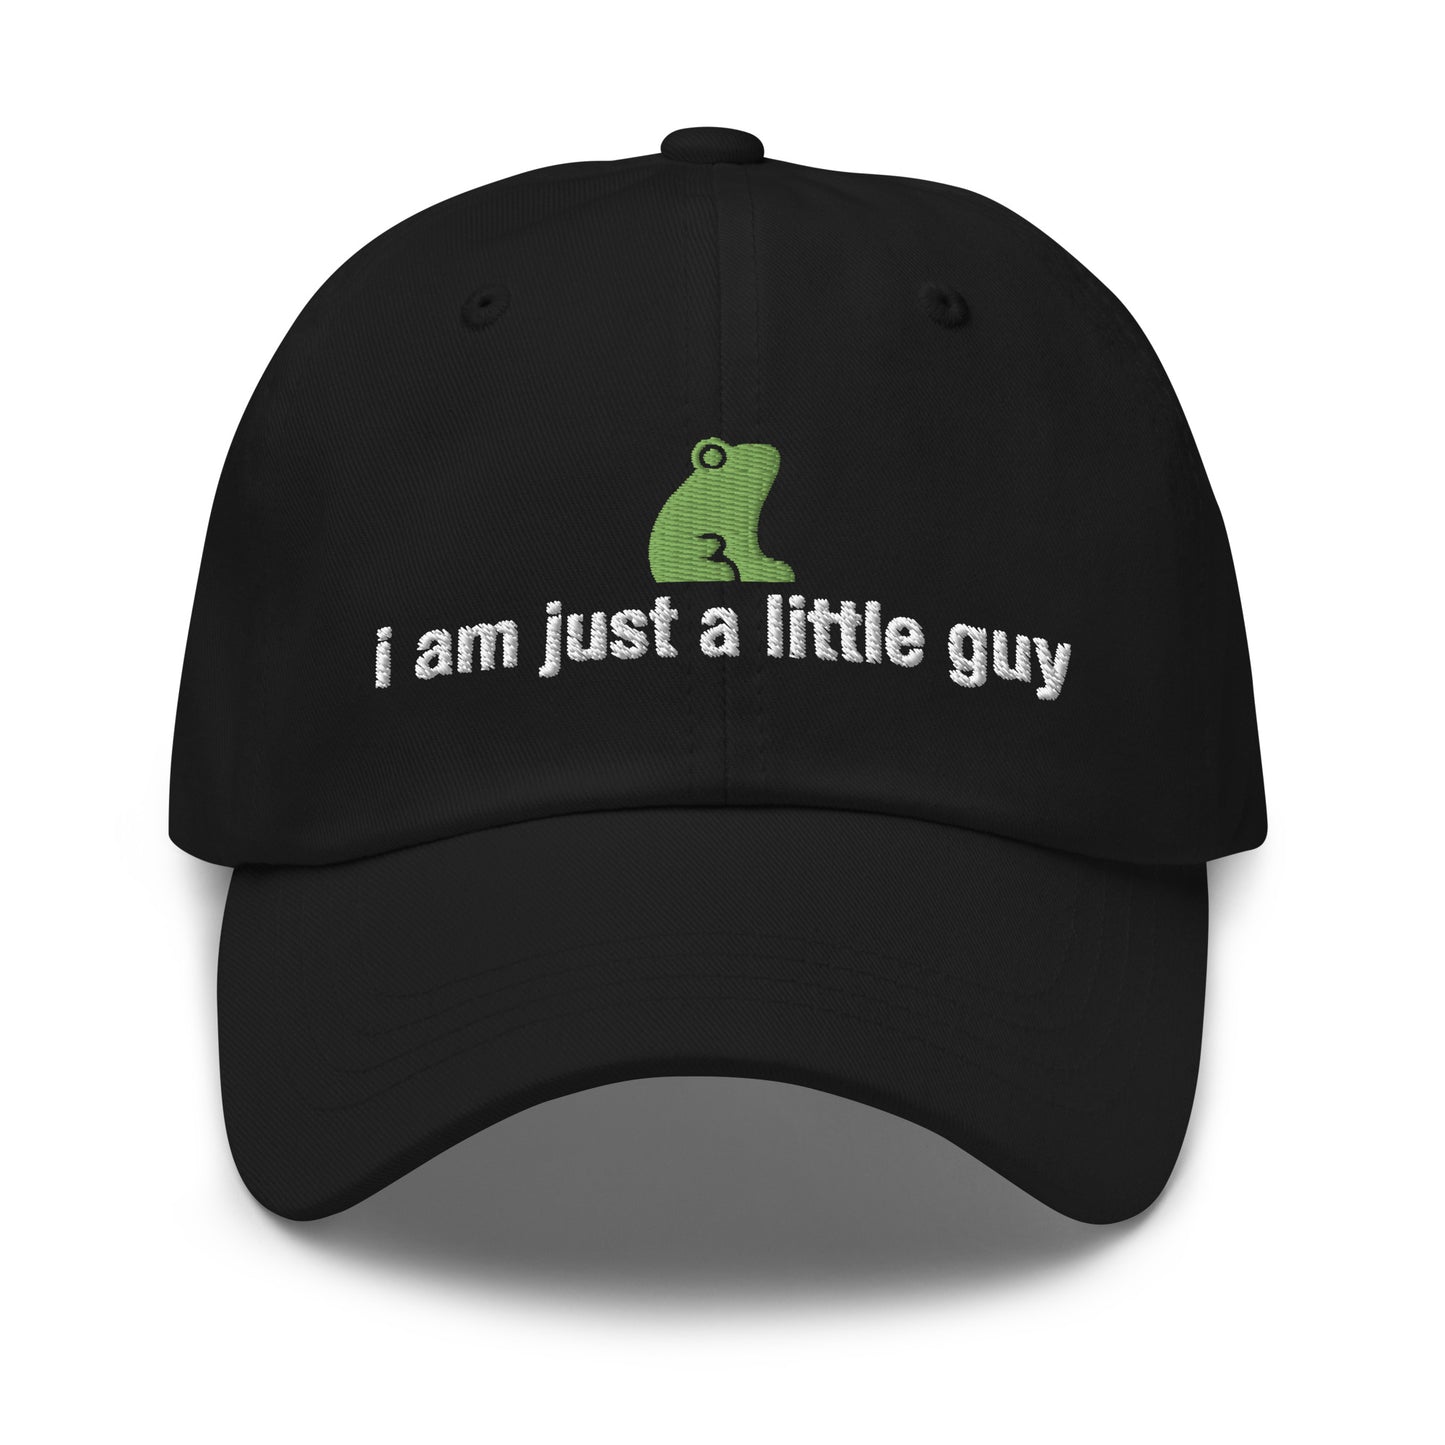 I Am Just a Little Guy hat